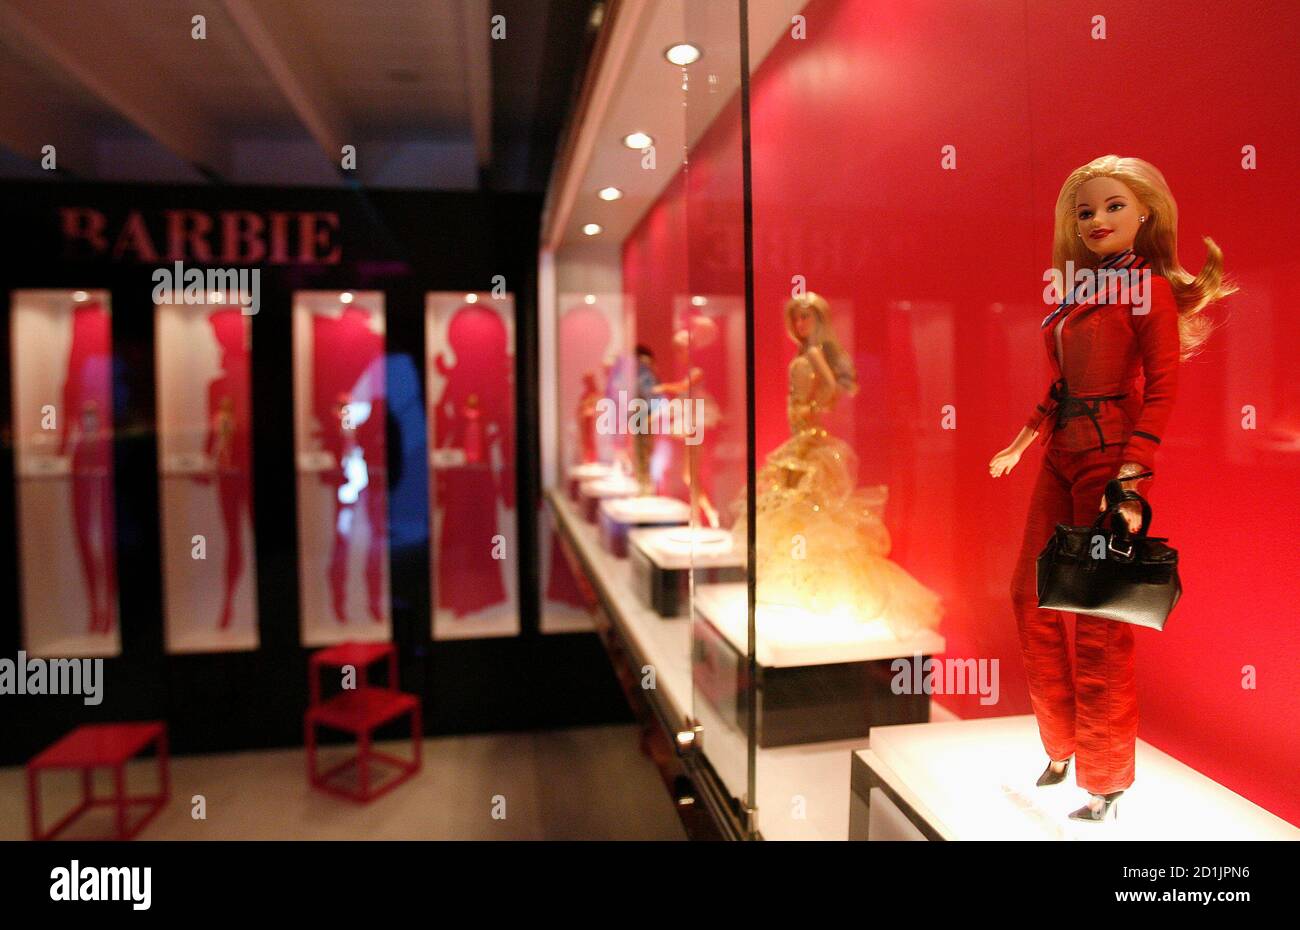 Overflødig Kontur Lav The Barbie in-house museum, featuring 25 of the most iconic dolls, is  pictured at Barbie's 50th birthday party at the Barbie real-life Malibu  Dream House in Malibu, California March 9, 2009. REUTERS/Mario